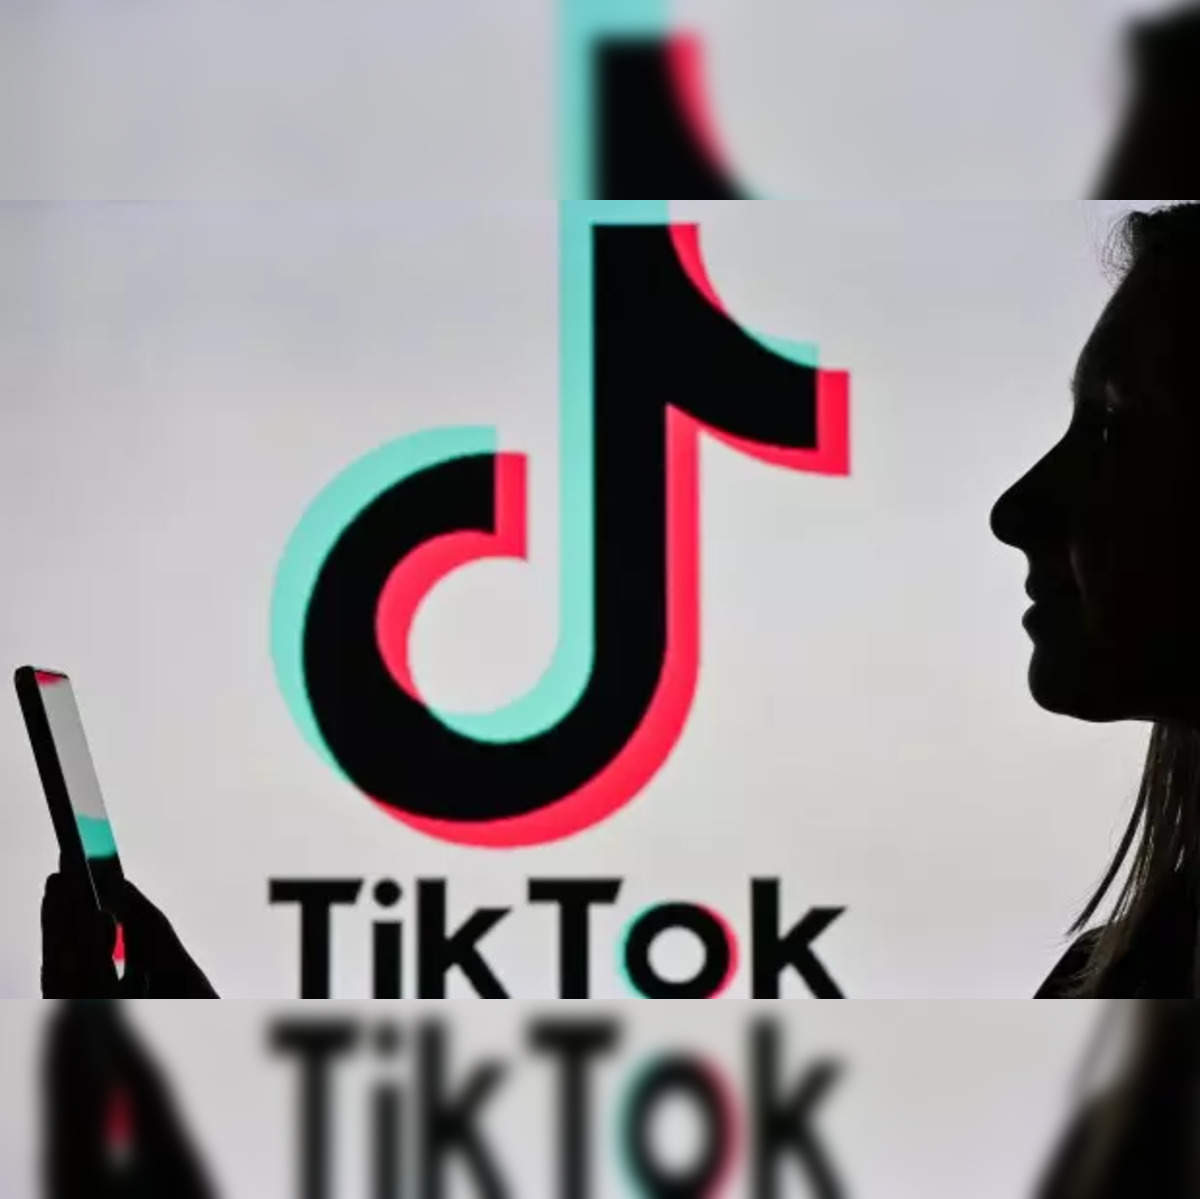 TikTok watch history: How to disable, delete? Step-by-step guide